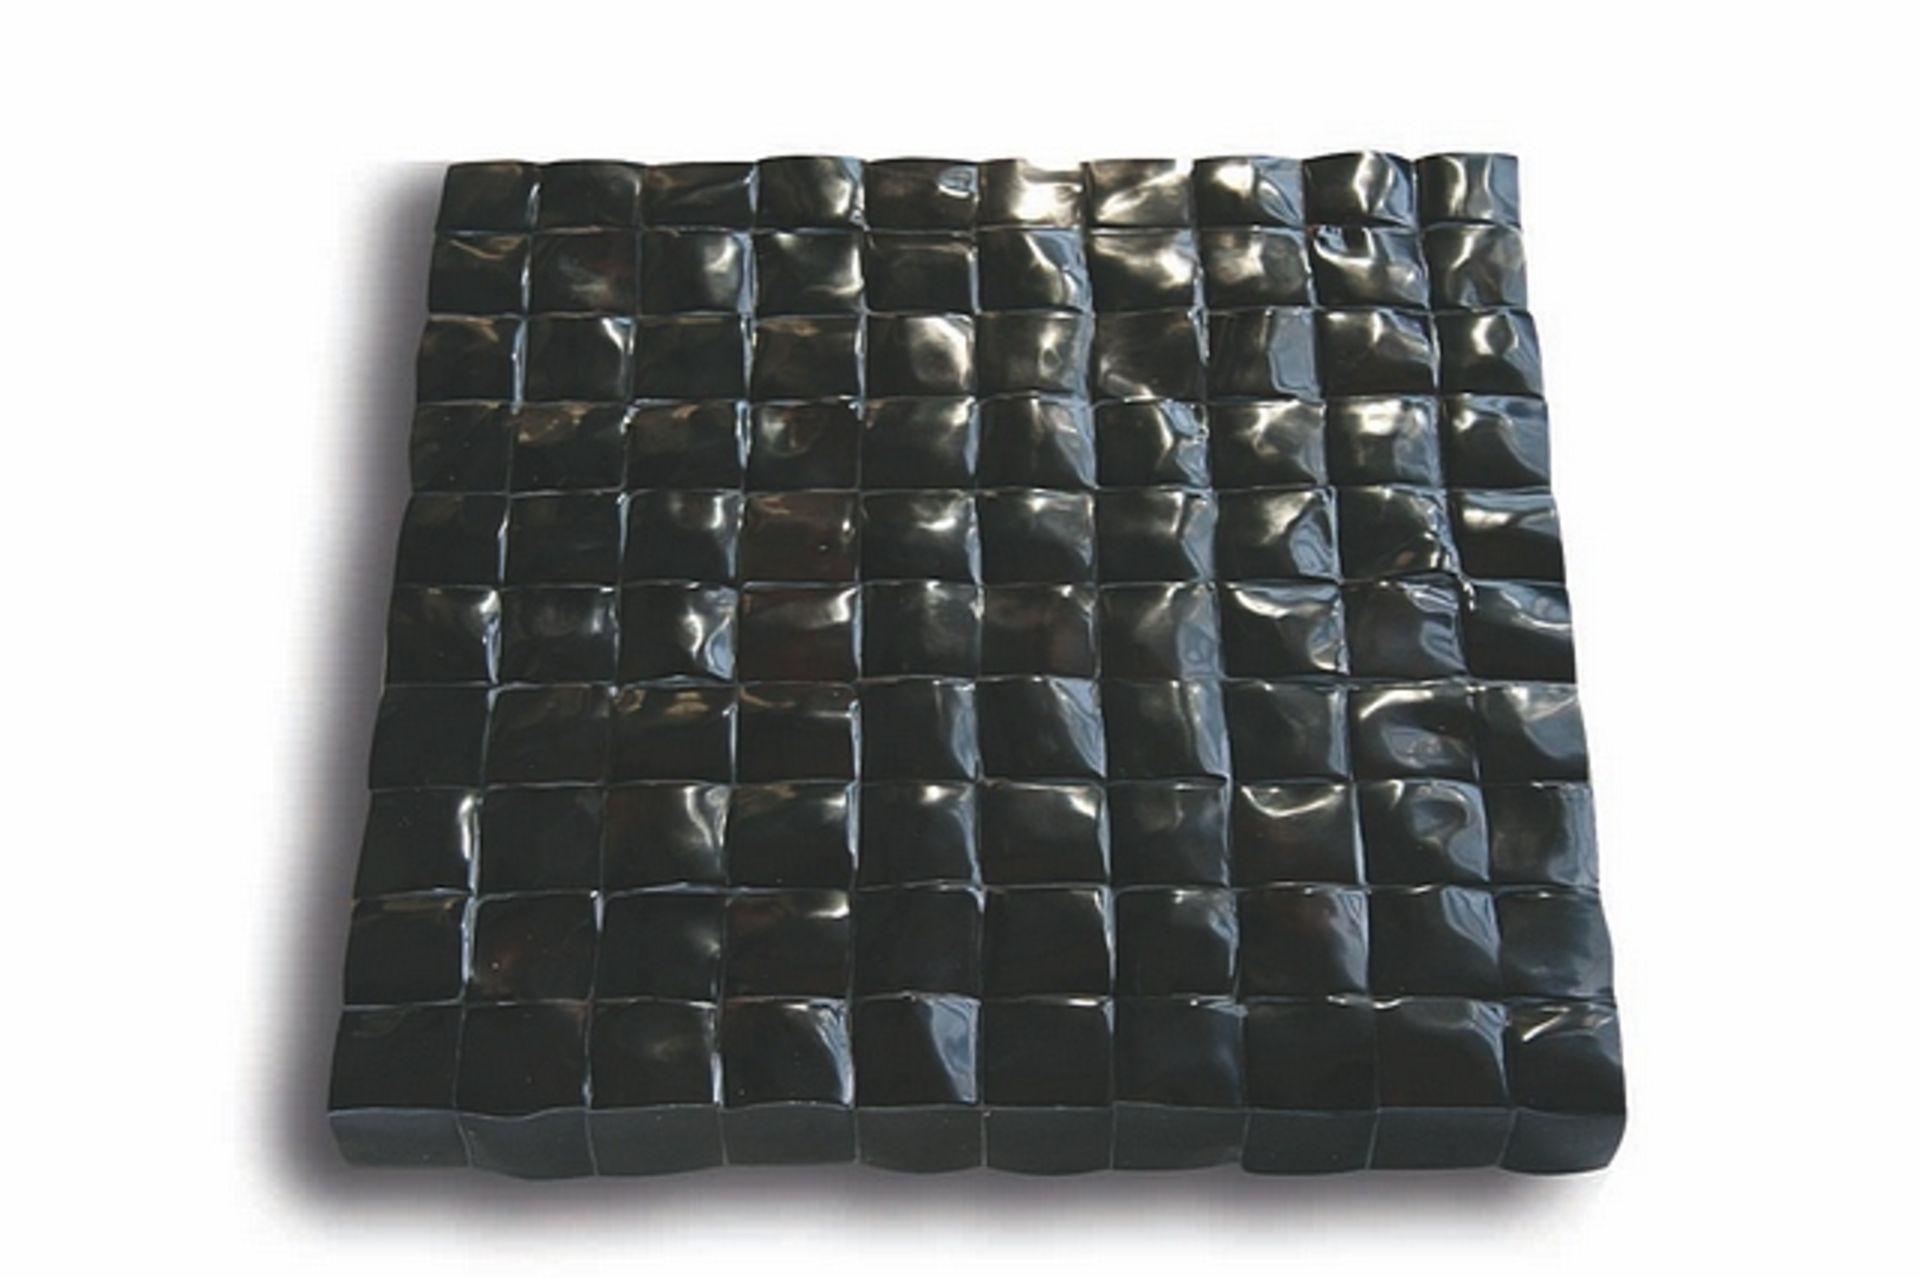 Wall panel saman black tab shell polished. Dark and decadent, a striking and bold addition the to